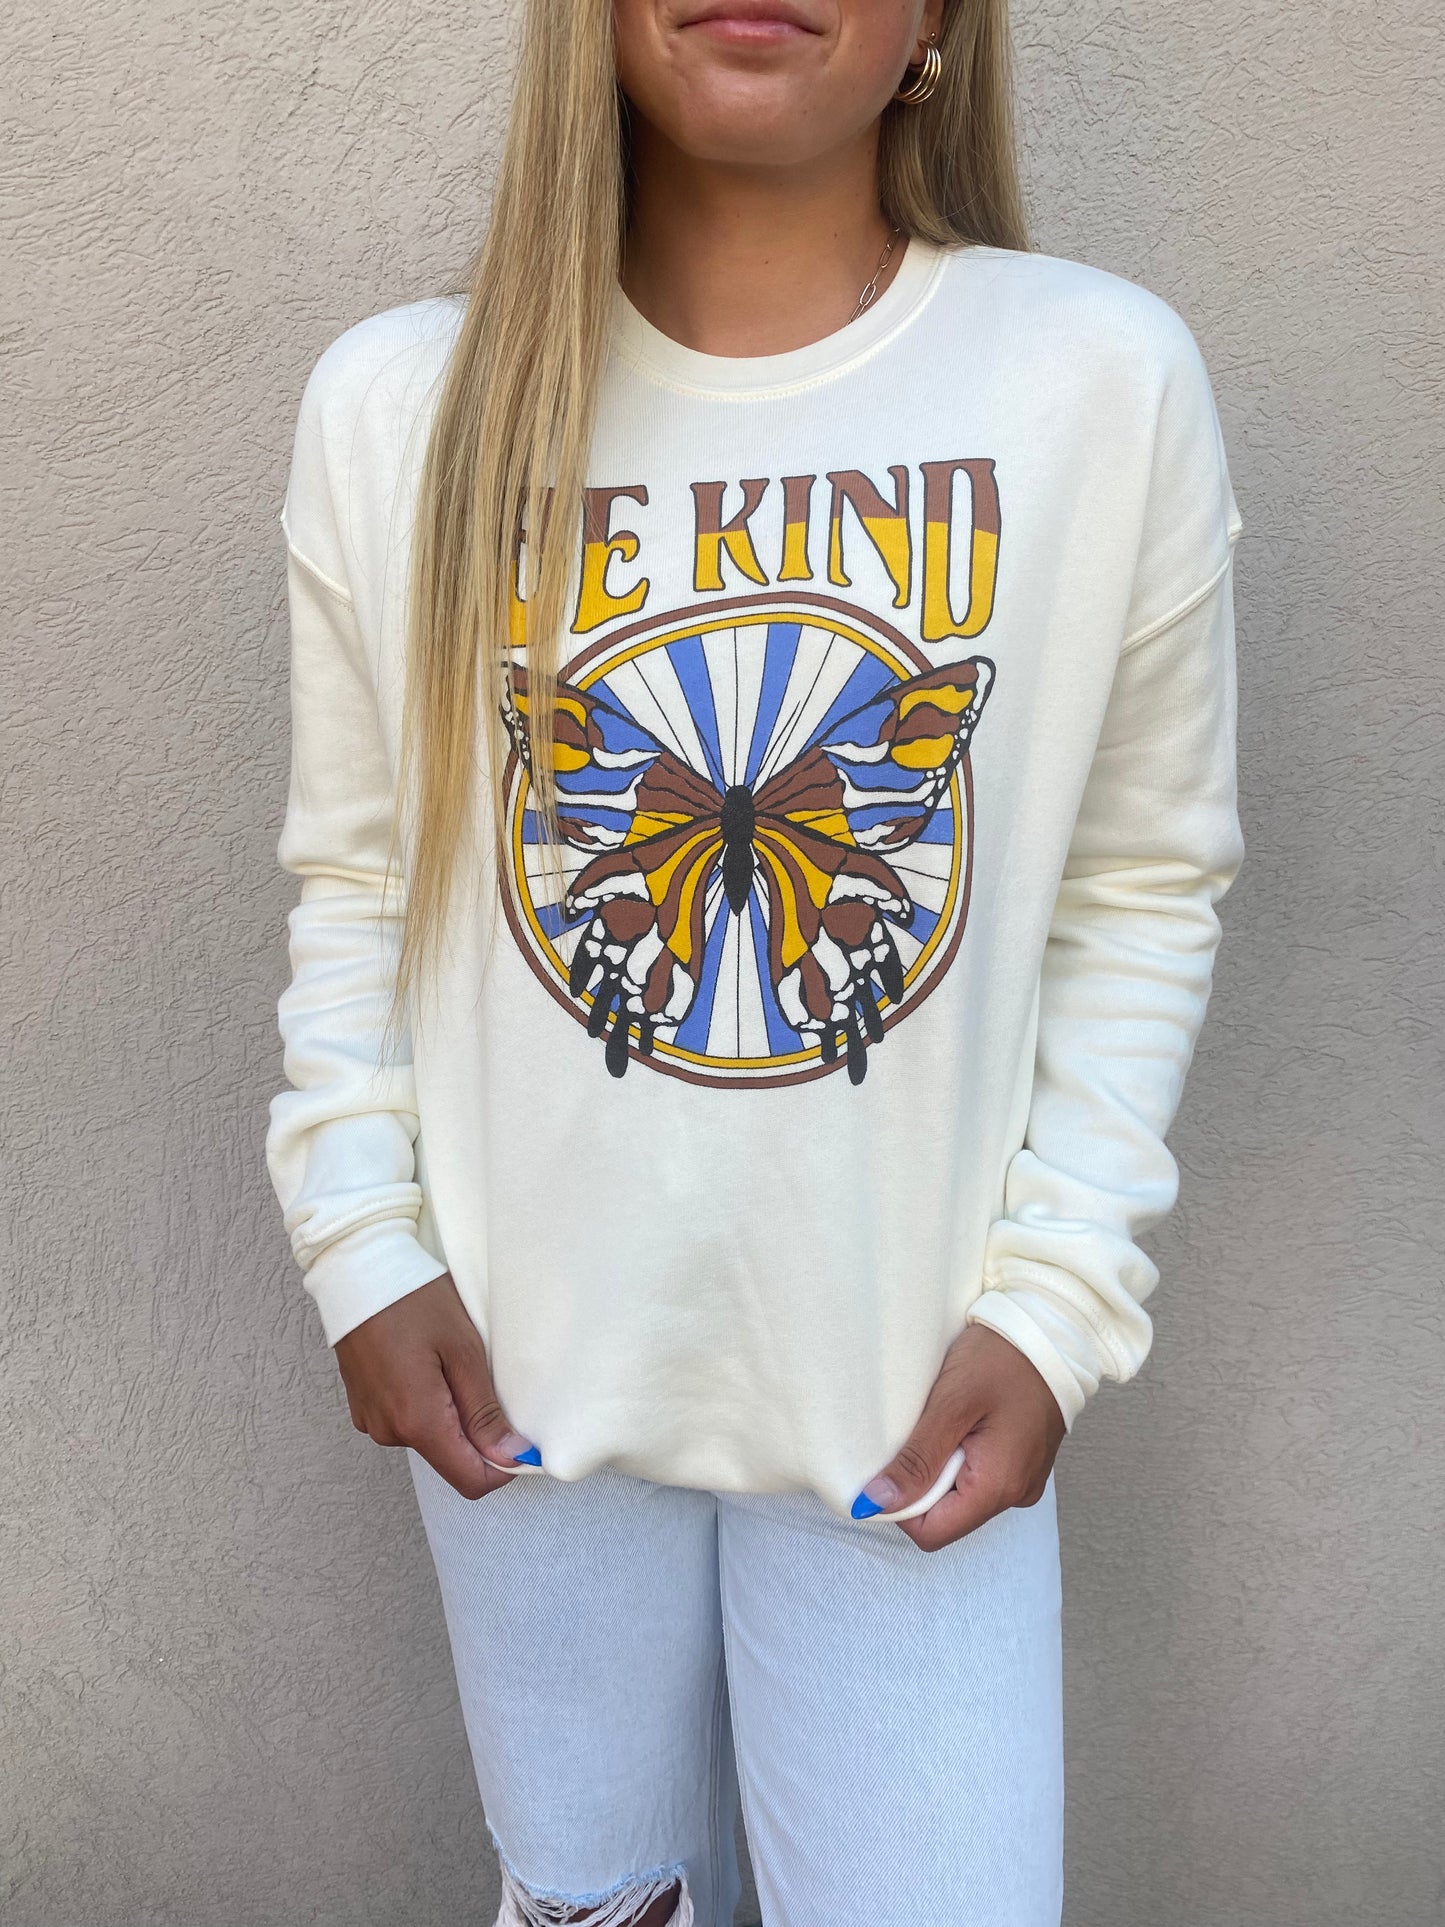 Be Kind Butterfly Graphic Sweatshirt